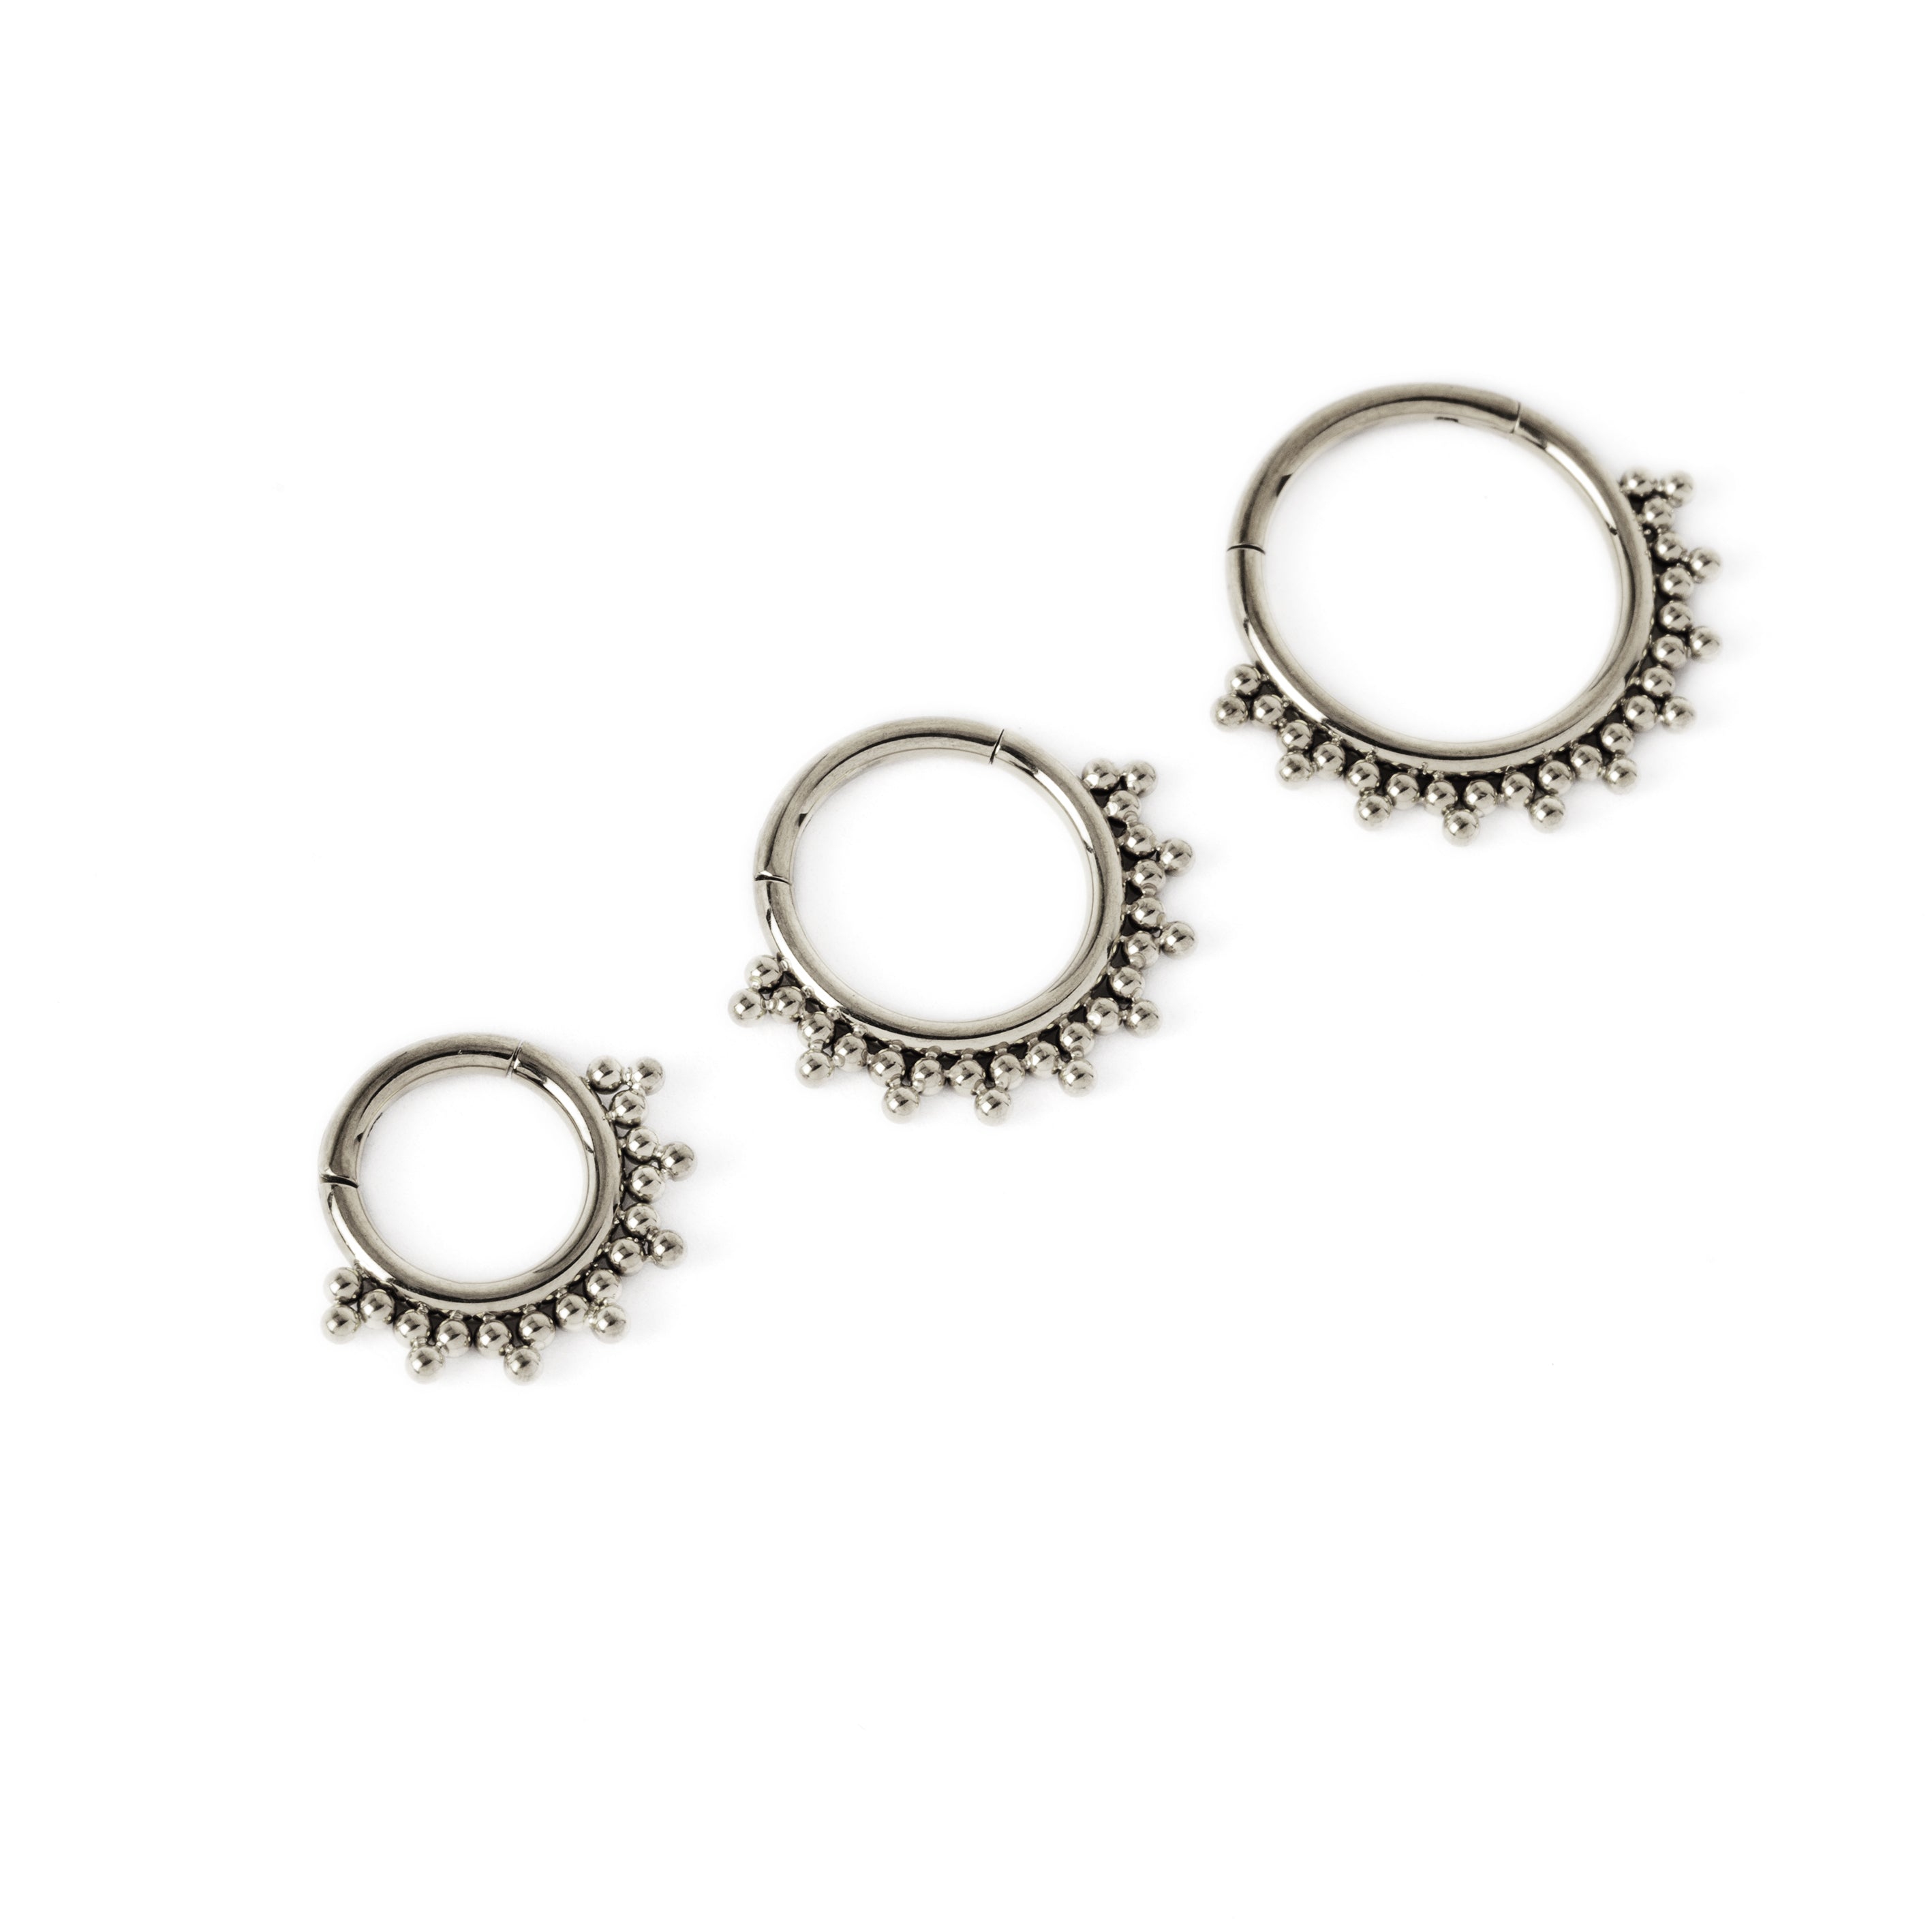 6mm, 8mm, 10mm Sarika surgical steel septum clickers side view